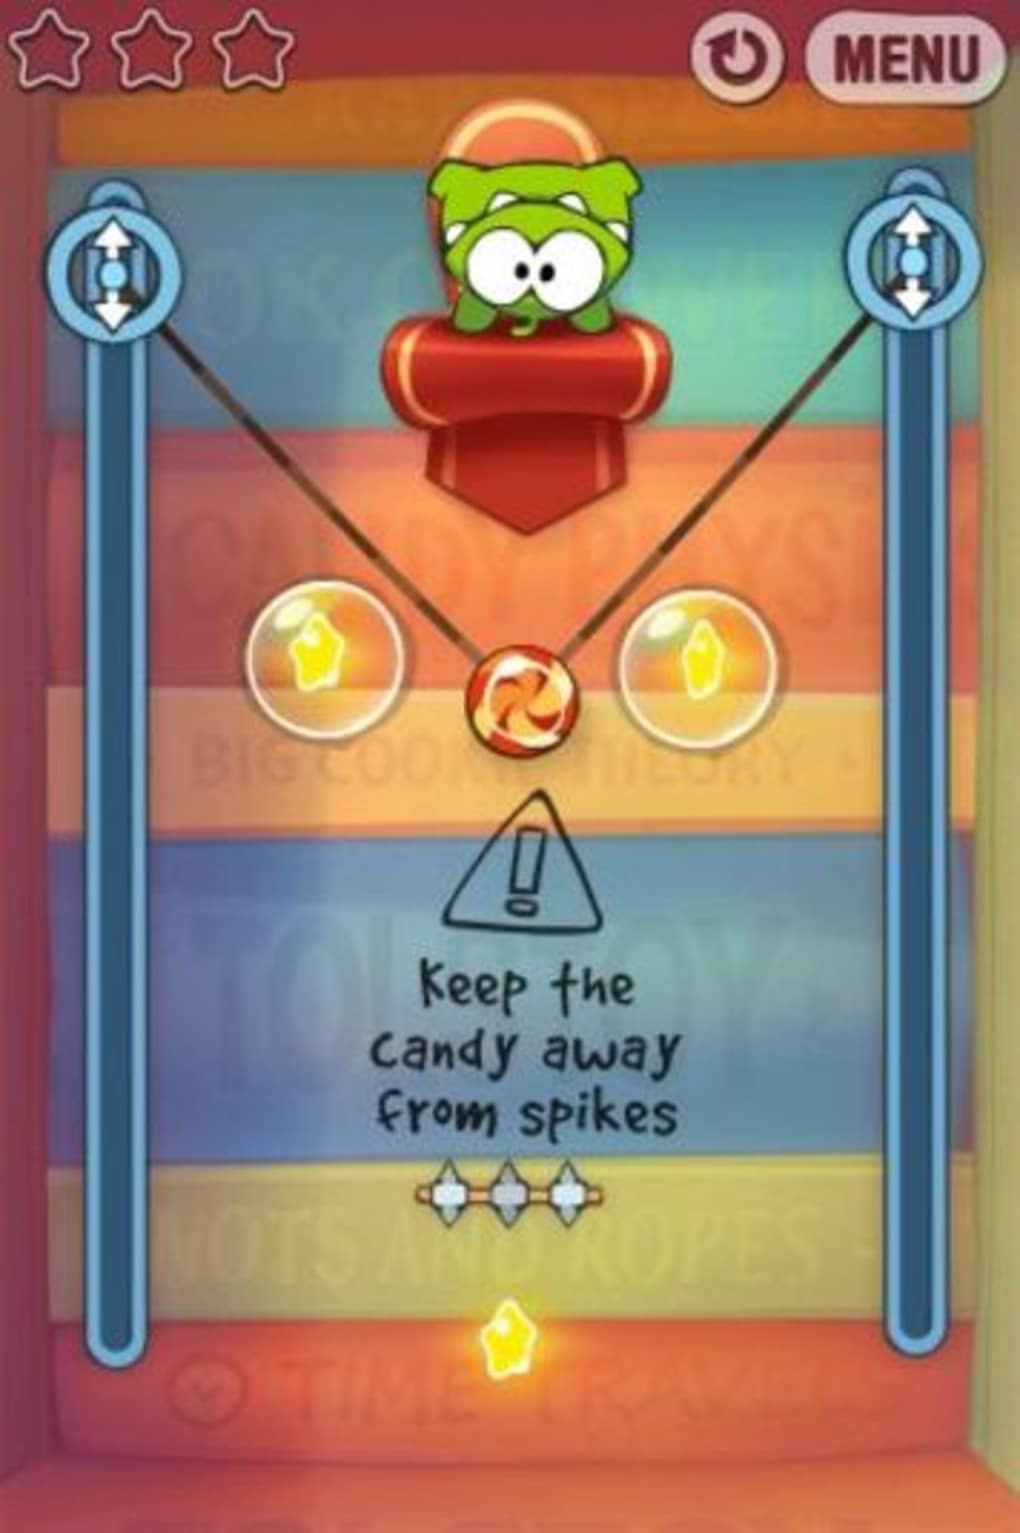 Cut the Rope: Experiments GOLD for Android - Download